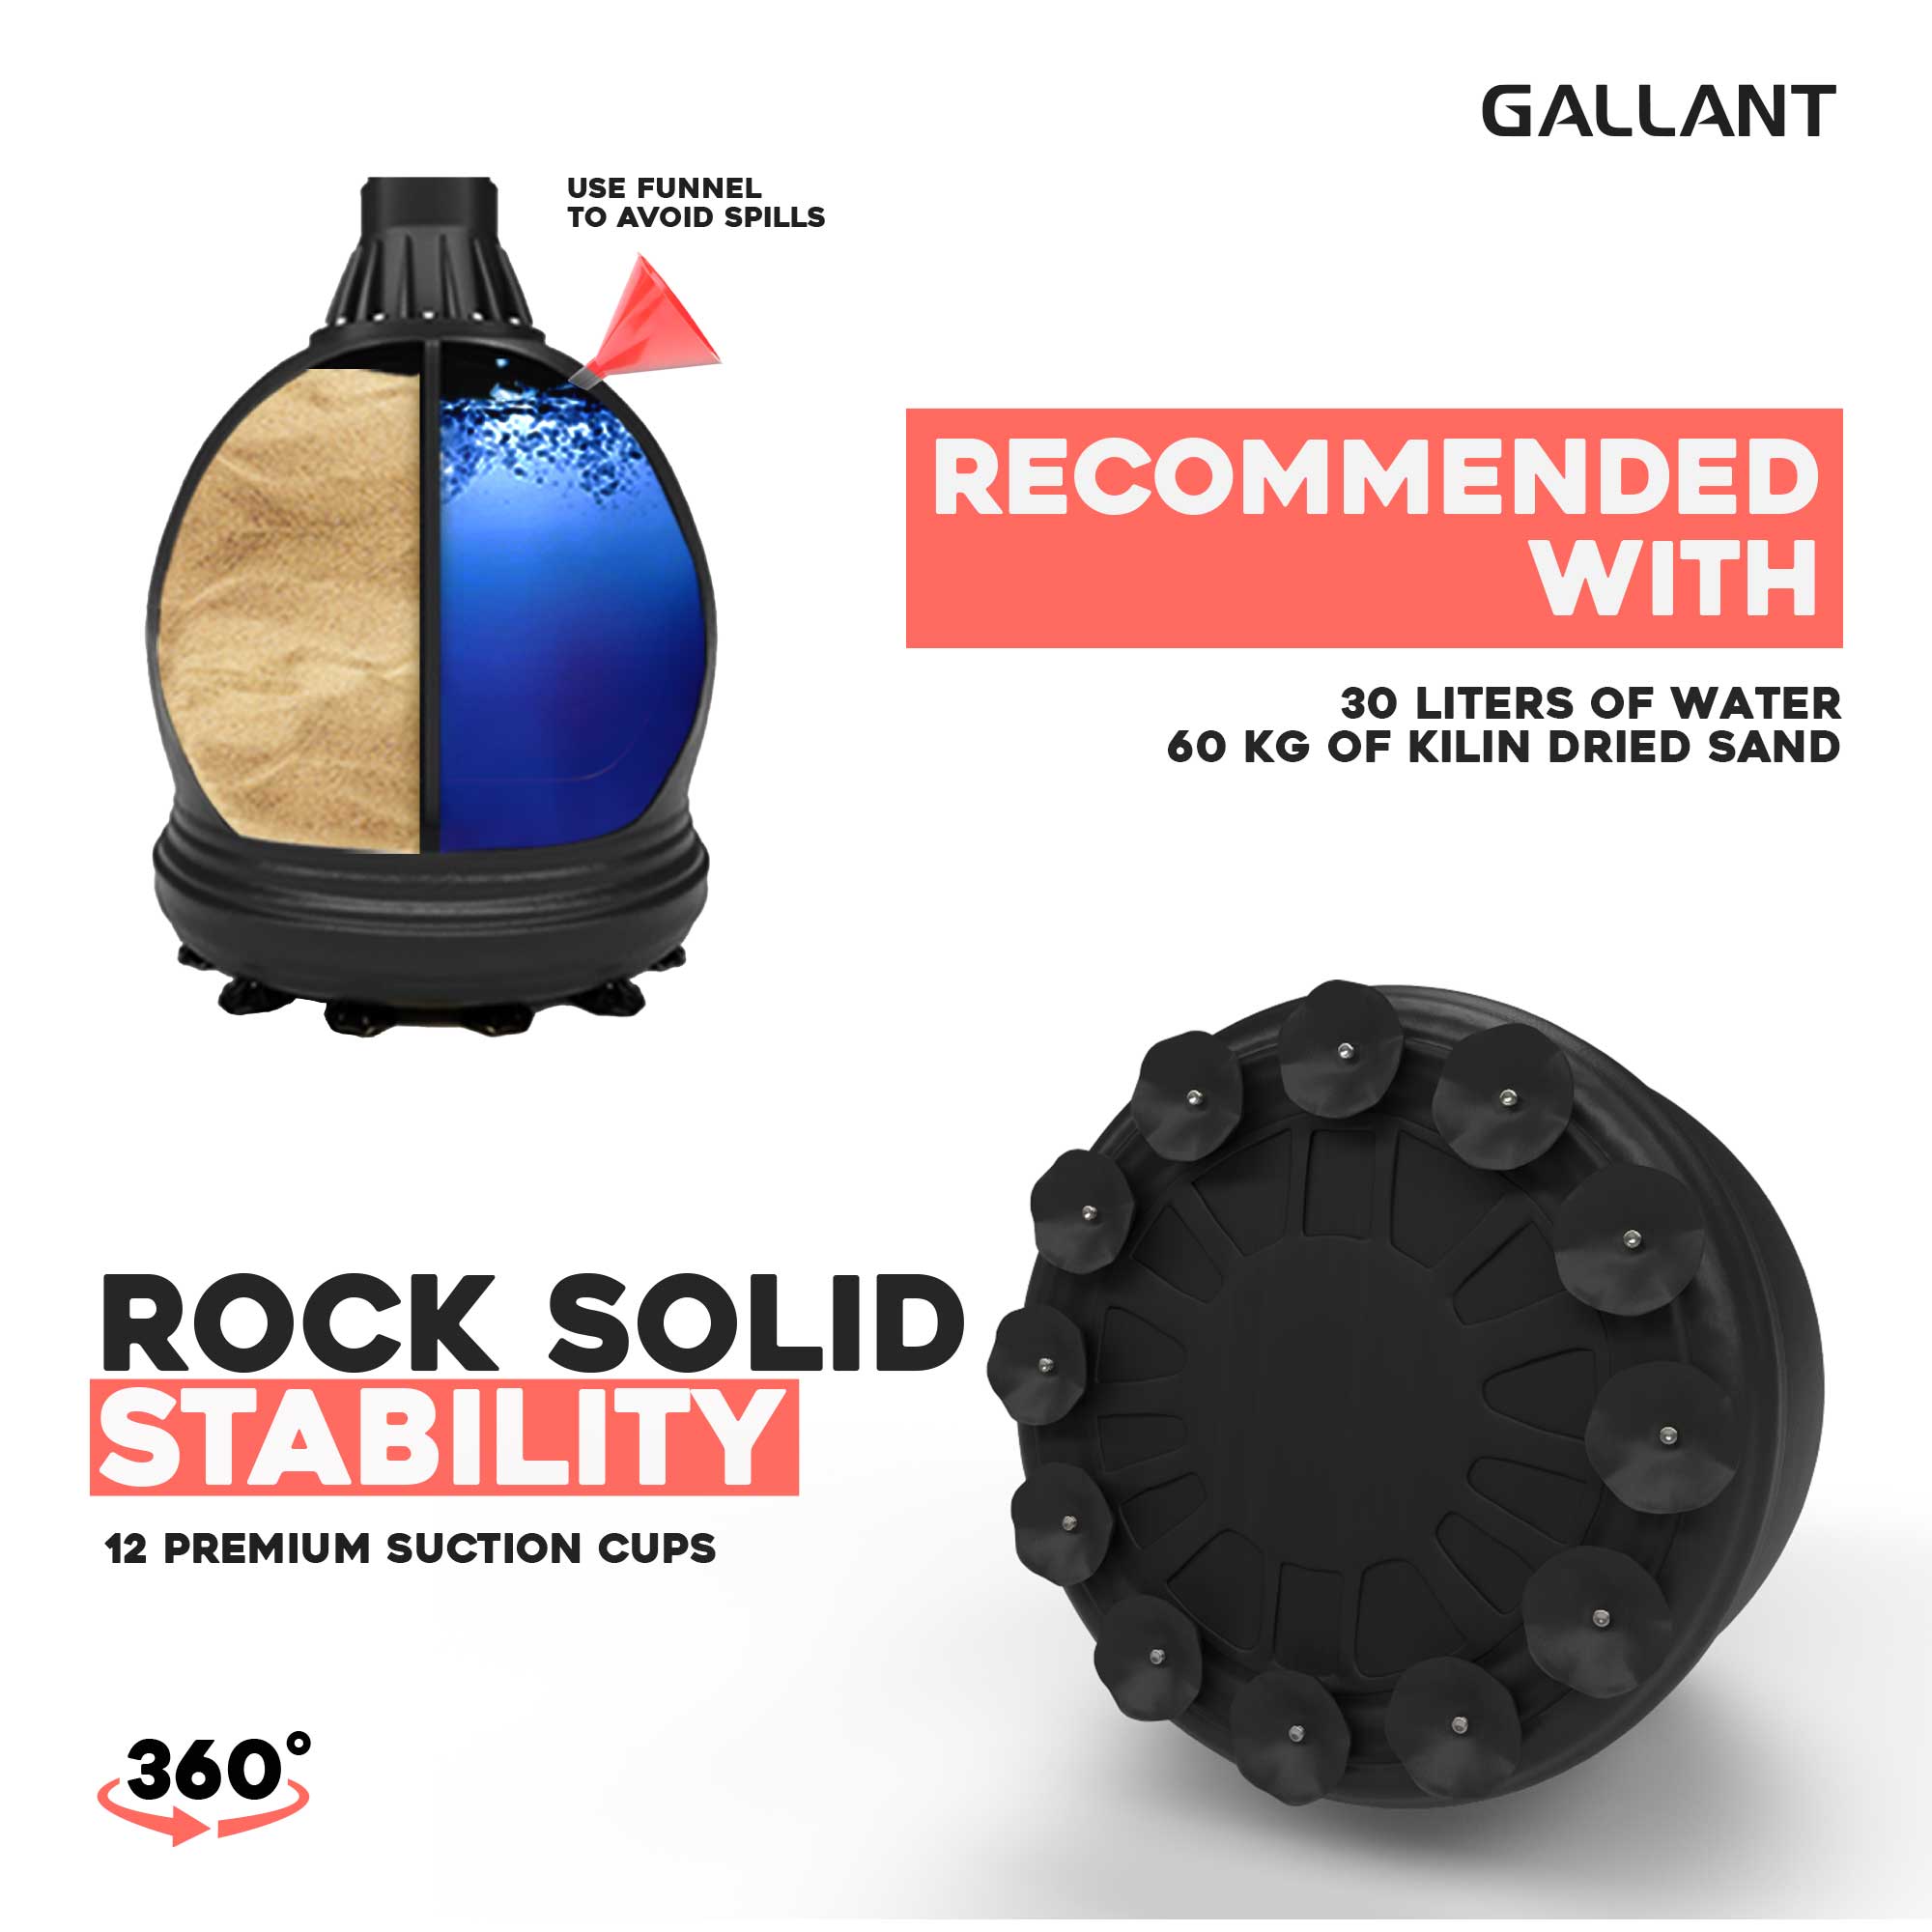 5.5ft Black Free-Standing Punchbag Recommended With Rock Solid Stability.